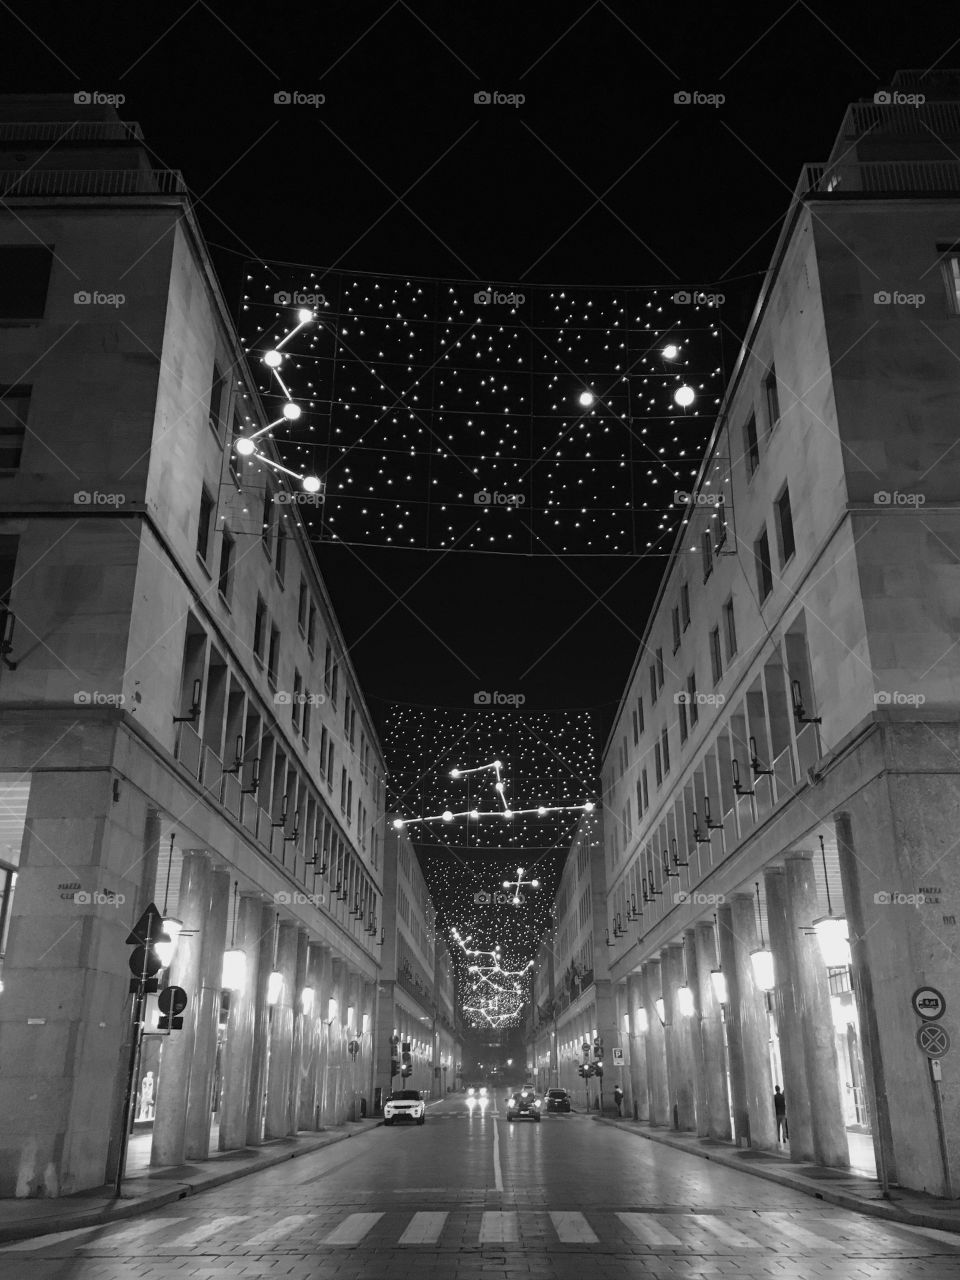 Lights in Turin, Italy